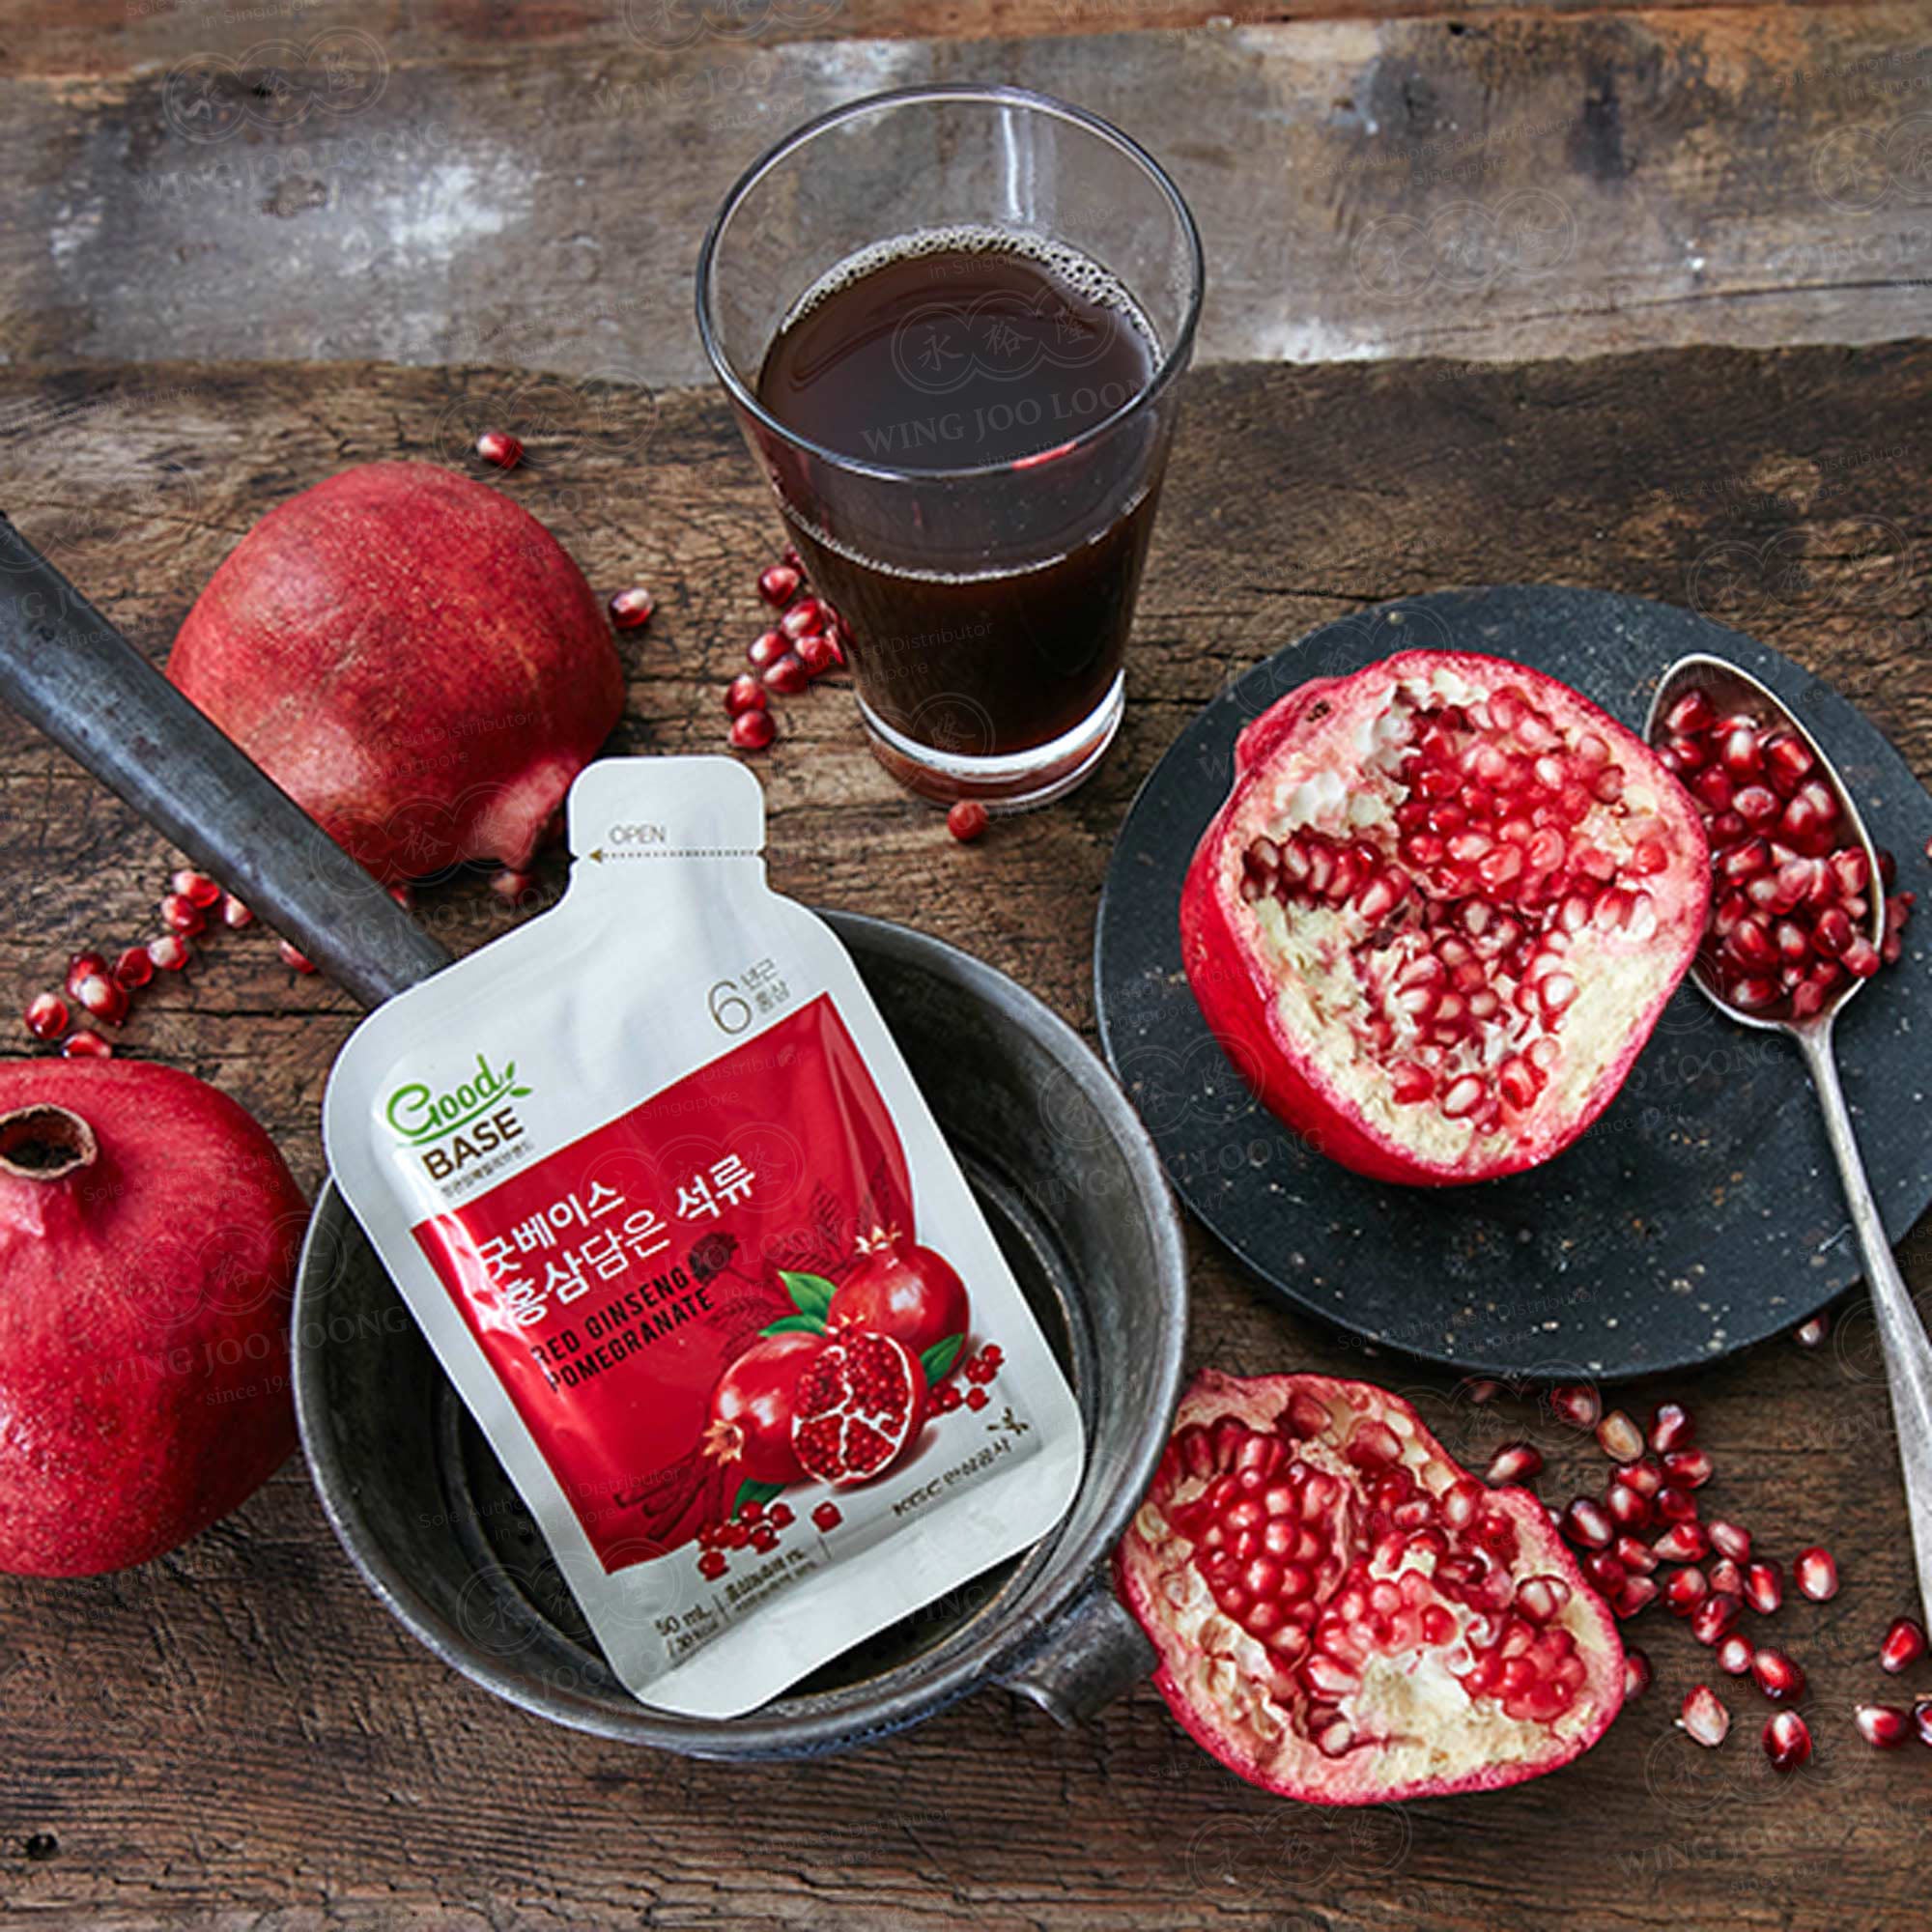 GoodBASE Pomegranate with Korean Red Ginseng Pouch 高丽参红石榴袋装